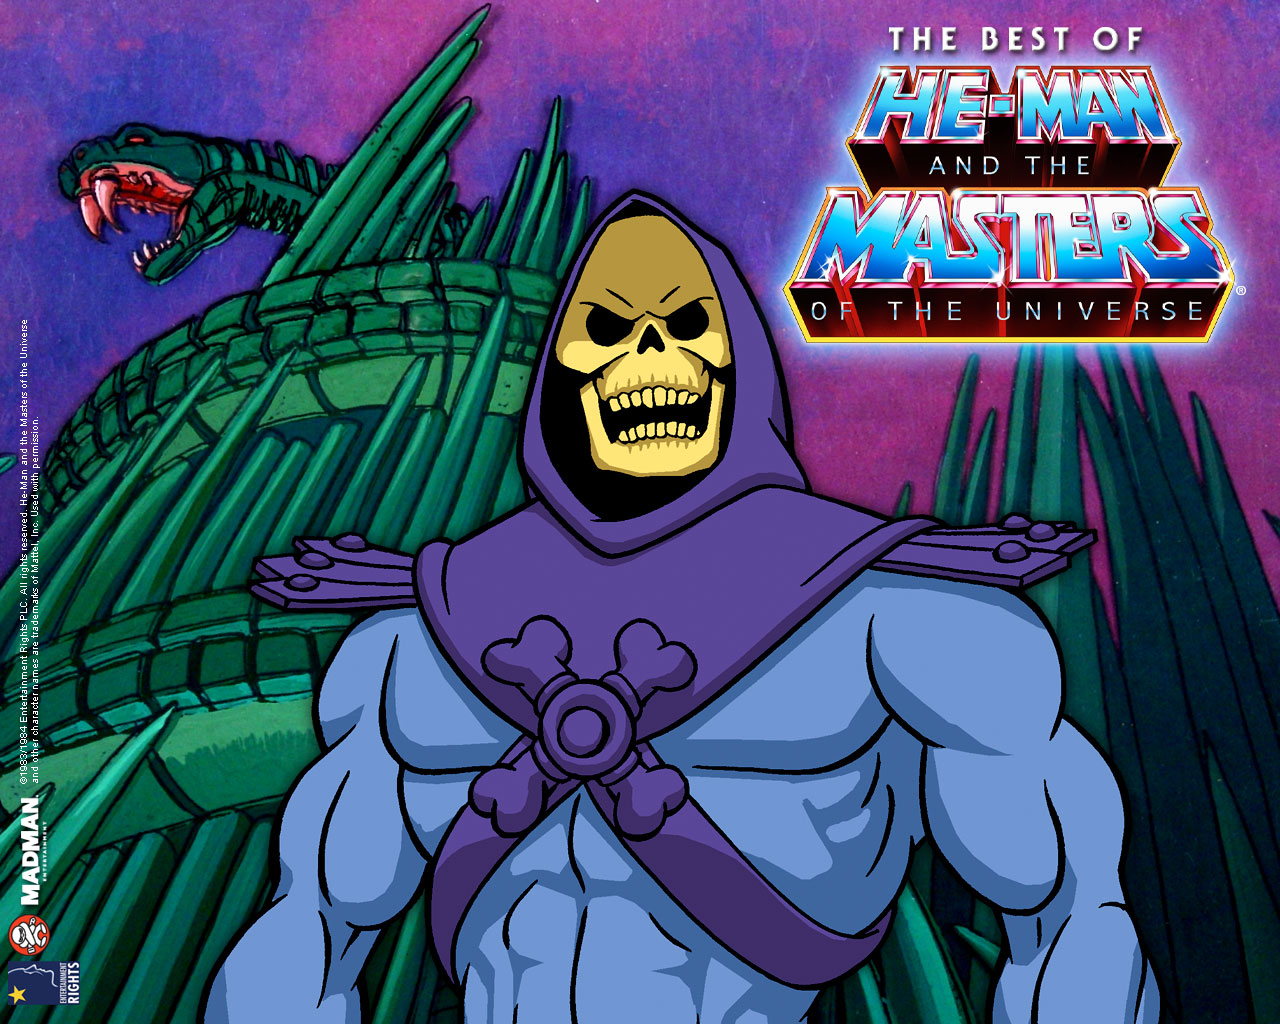 he-man_and_the_masters_of_179_1280.jpg